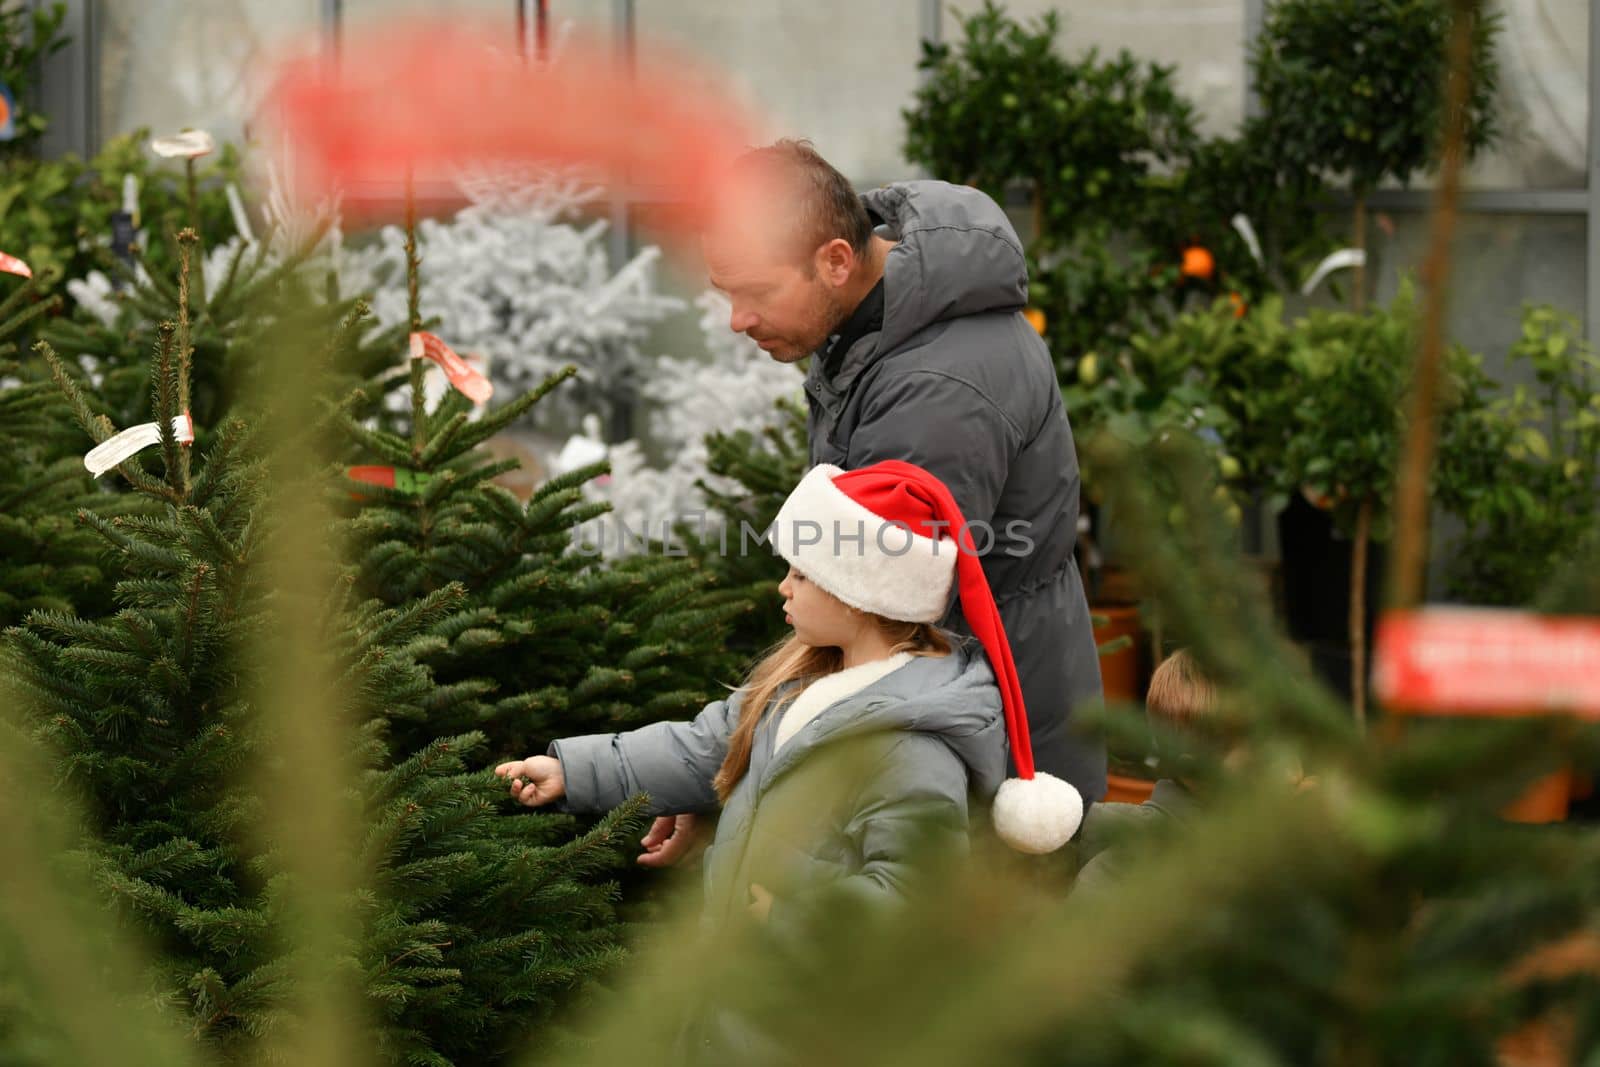 Father and children choose a Christmas tree in the market.